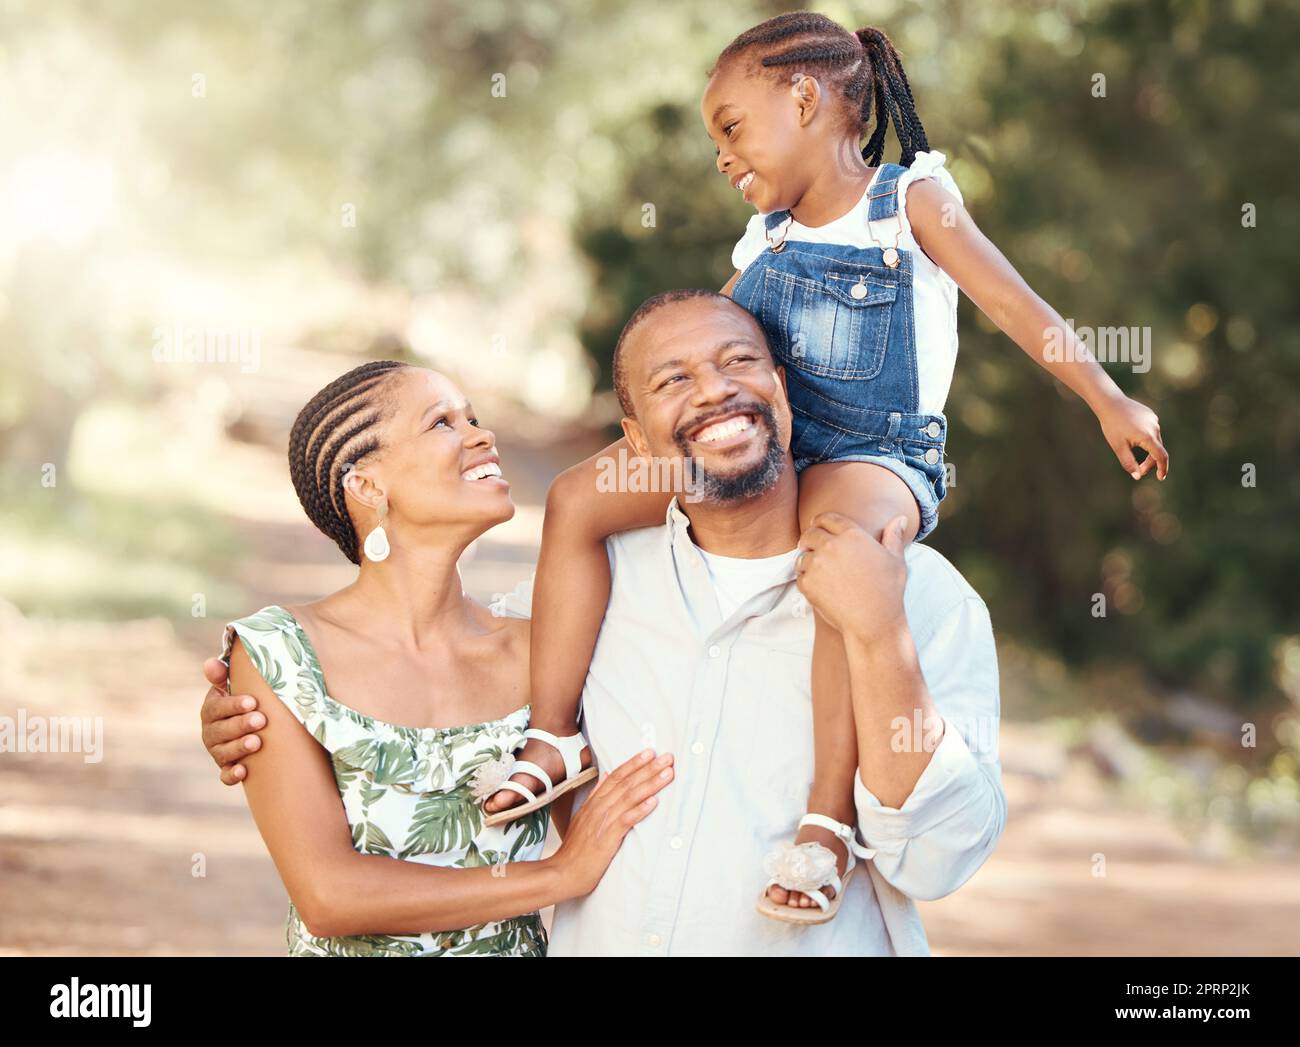 Family, love and children with a happy mother, father and daughter outside in a park during summer. Mature man and woman bonding and spending time with their cute little girl outdoors in nature Stock Photo